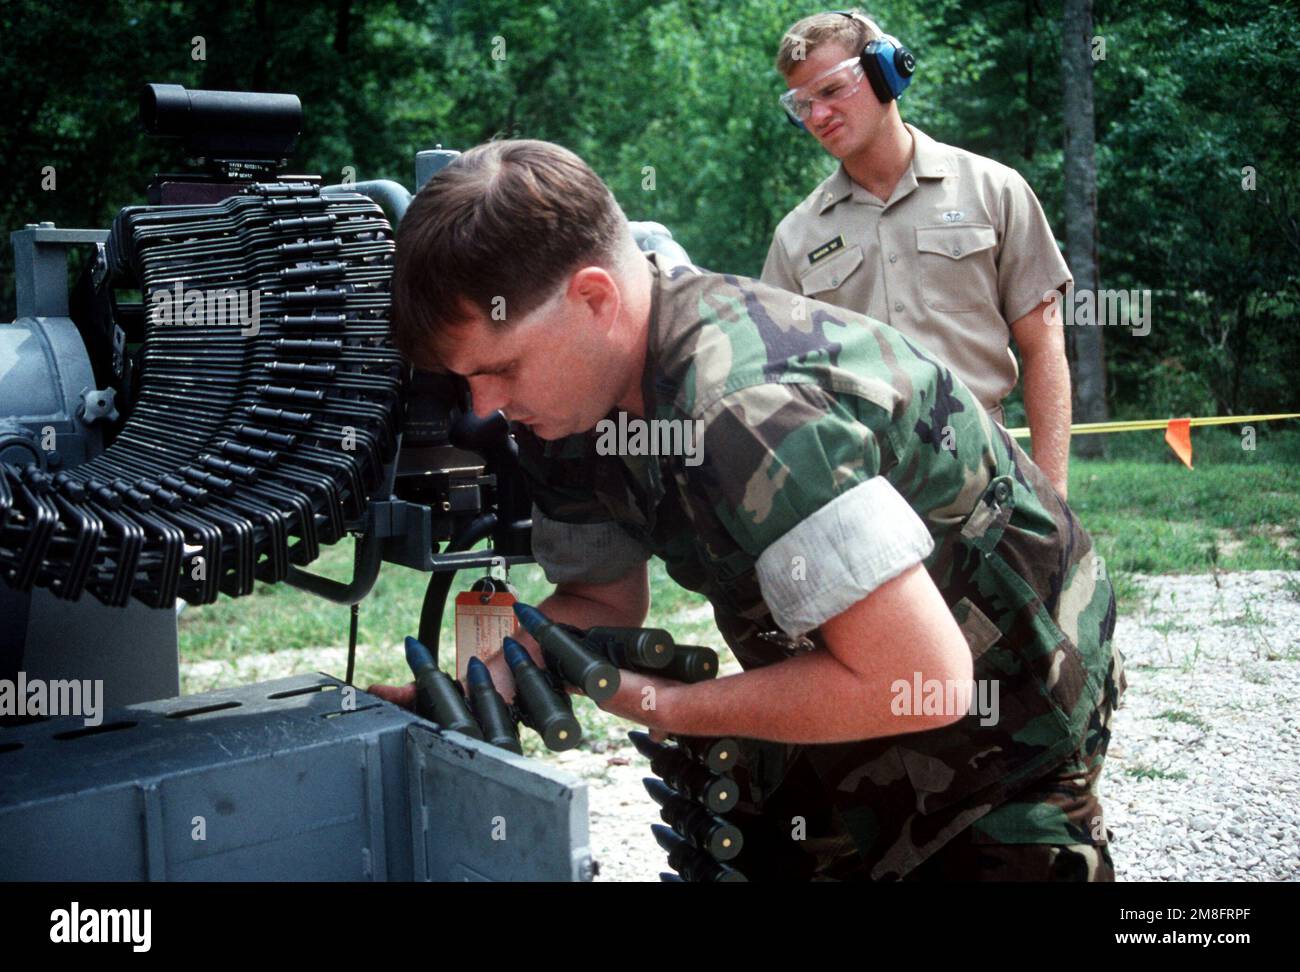 A petty officer places a fresh belt of ammunition in the magazine of a Mark 38 25mm gun system as a visiting midshipman from the U.S. Naval Academy waits to fire the weapon. Base: Naval Weapons Sup Cen, Crane State: Indiana(IN) Country: United States Of America (USA) Stock Photo